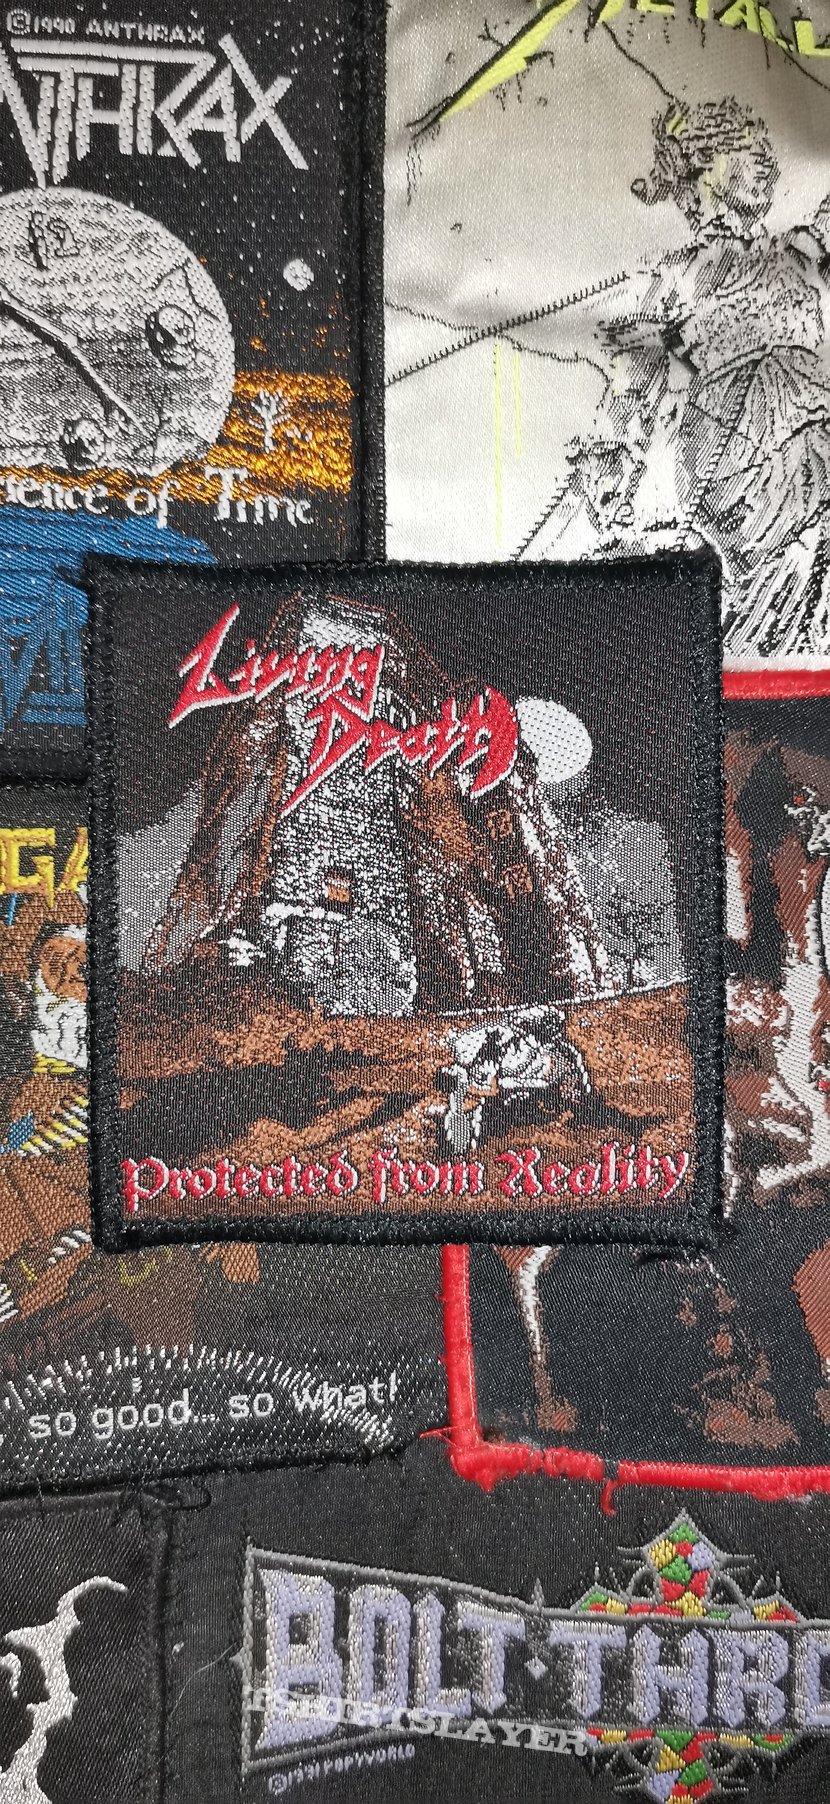 Living Death protected from reality patch